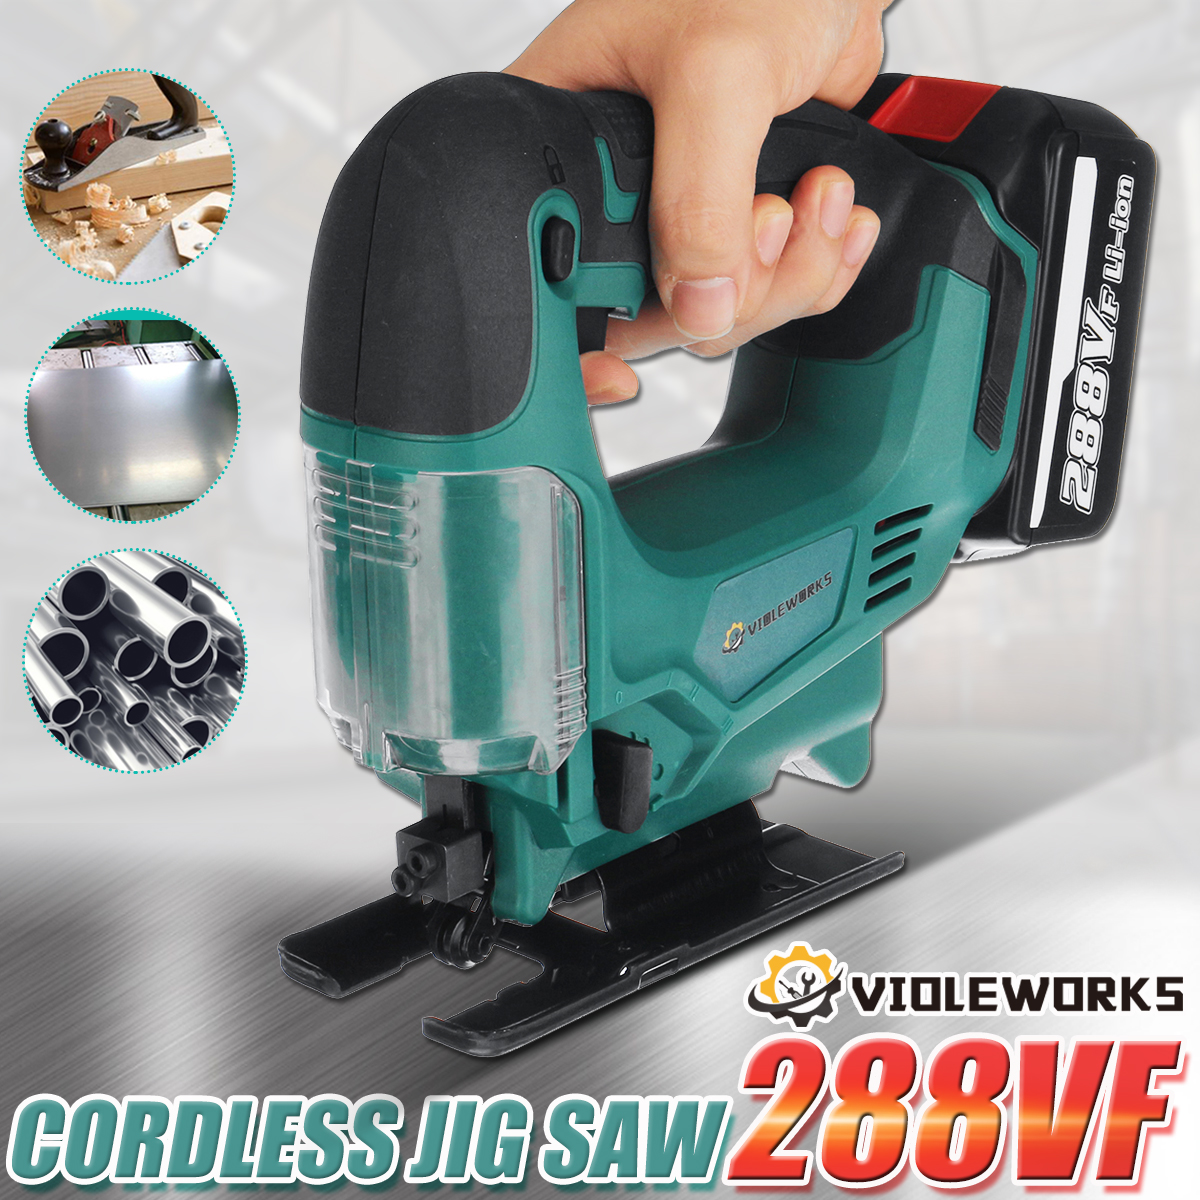 Violeworks-288VF-21V-Cordless-Jigsaw-Rechargeable-Electric-One-Hand-Jig-Saw-W-12pcs-Battery-1841577-1